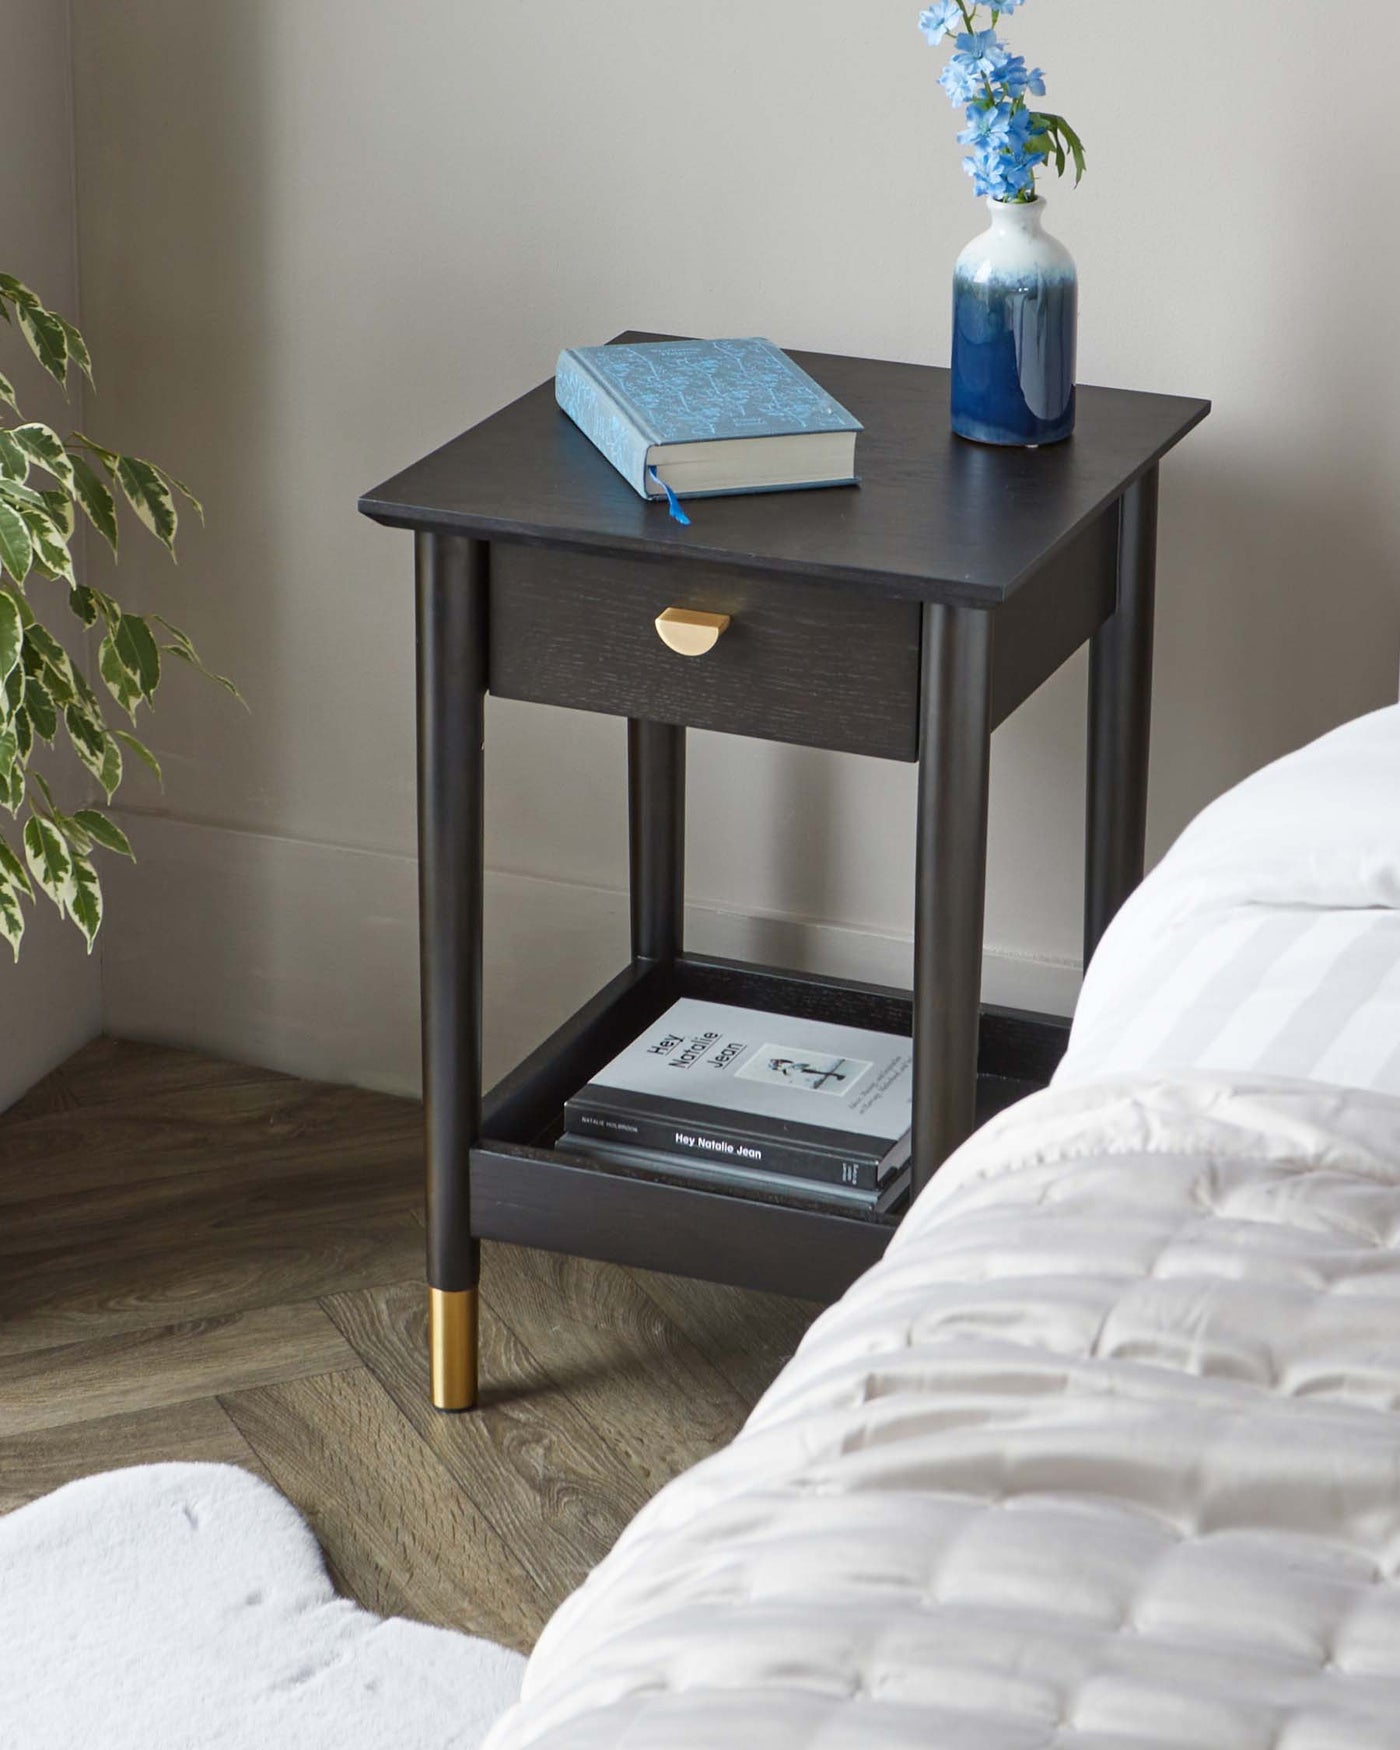 Black wooden side table with a square top, a single drawer with a brass handle, and an open lower shelf. The table stands on four legs with brass-capped feet. A blue book and a ceramic vase with blue flowers are on top of the table, and two books are placed on the lower shelf.